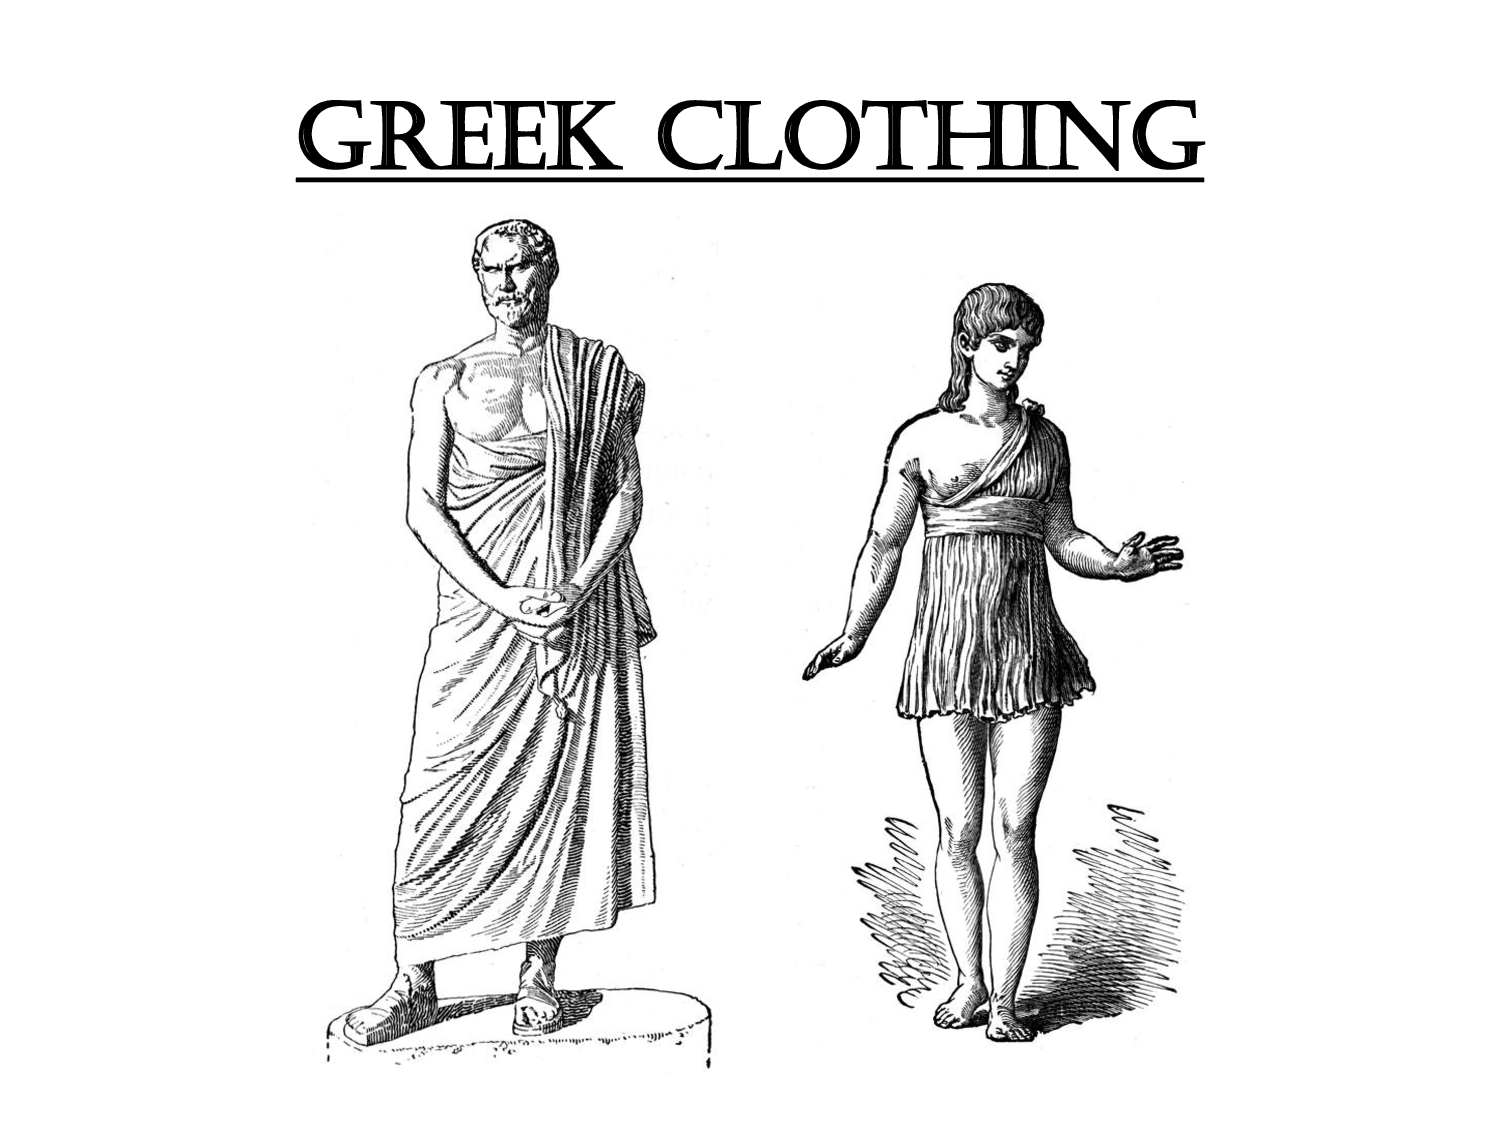 What shoes did Greeks wear?